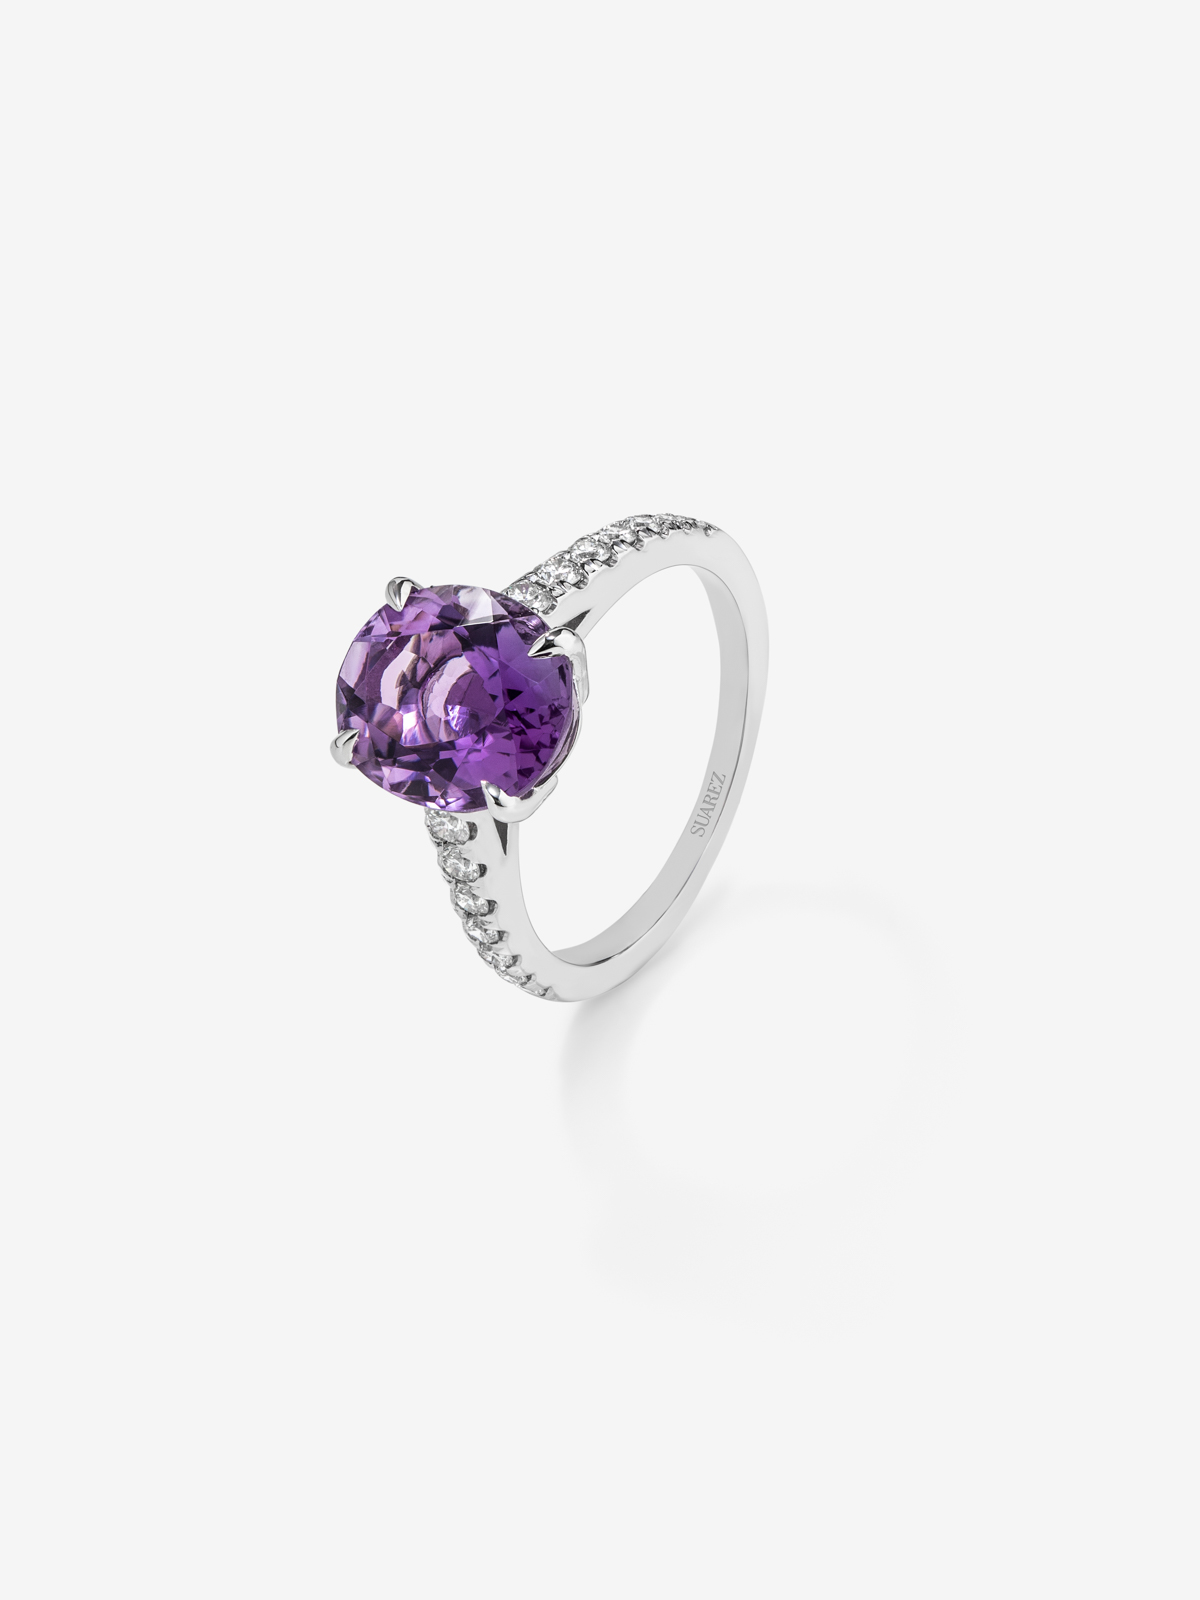 18K White Gold Solitary Ring with Purple Ameatist in 3.51 cts oval size and diamonds in bright size